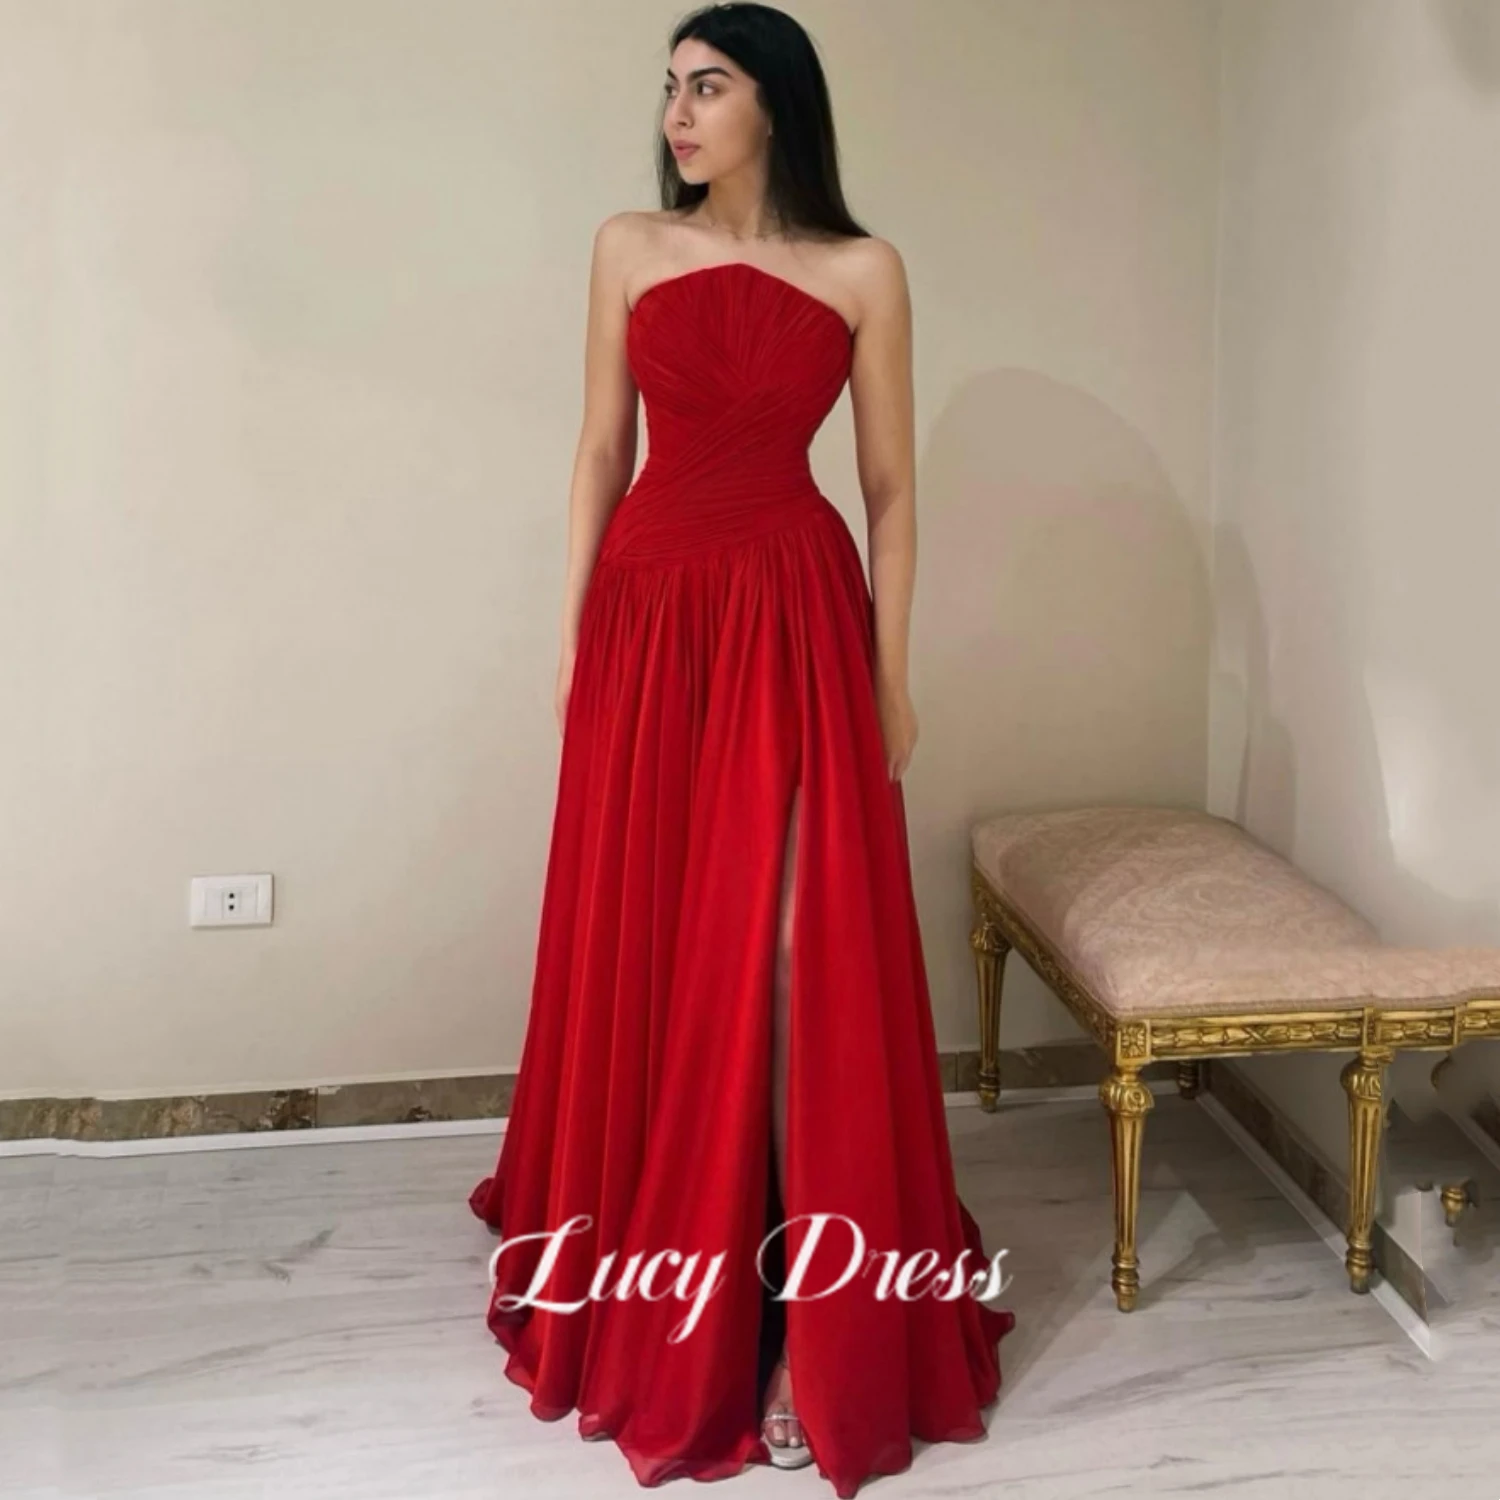 

Lucy Chiffon Graduation Gown Dress Party Red Robes Quinceanera Dresses Prom Deess Ball Gowns Robe De Soiree Femmes Happy Sharon.